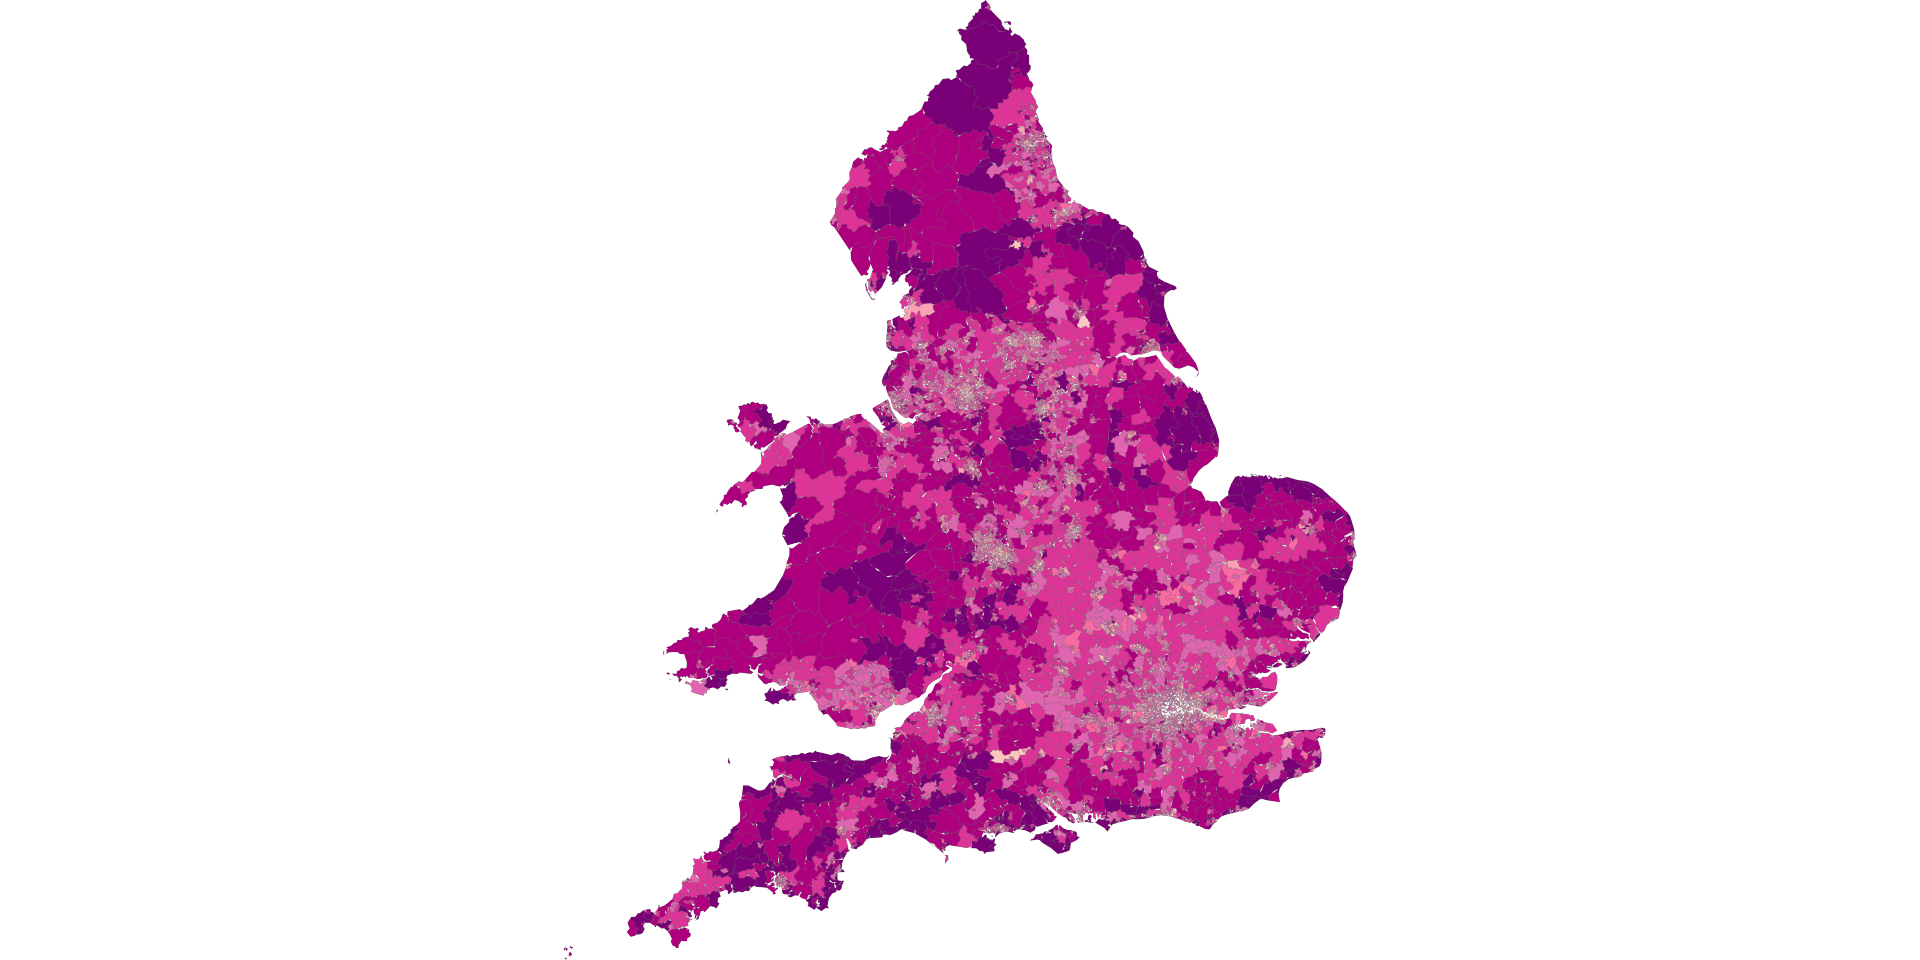 What is the average age of someone in the UK? Age of UK population by MSOA